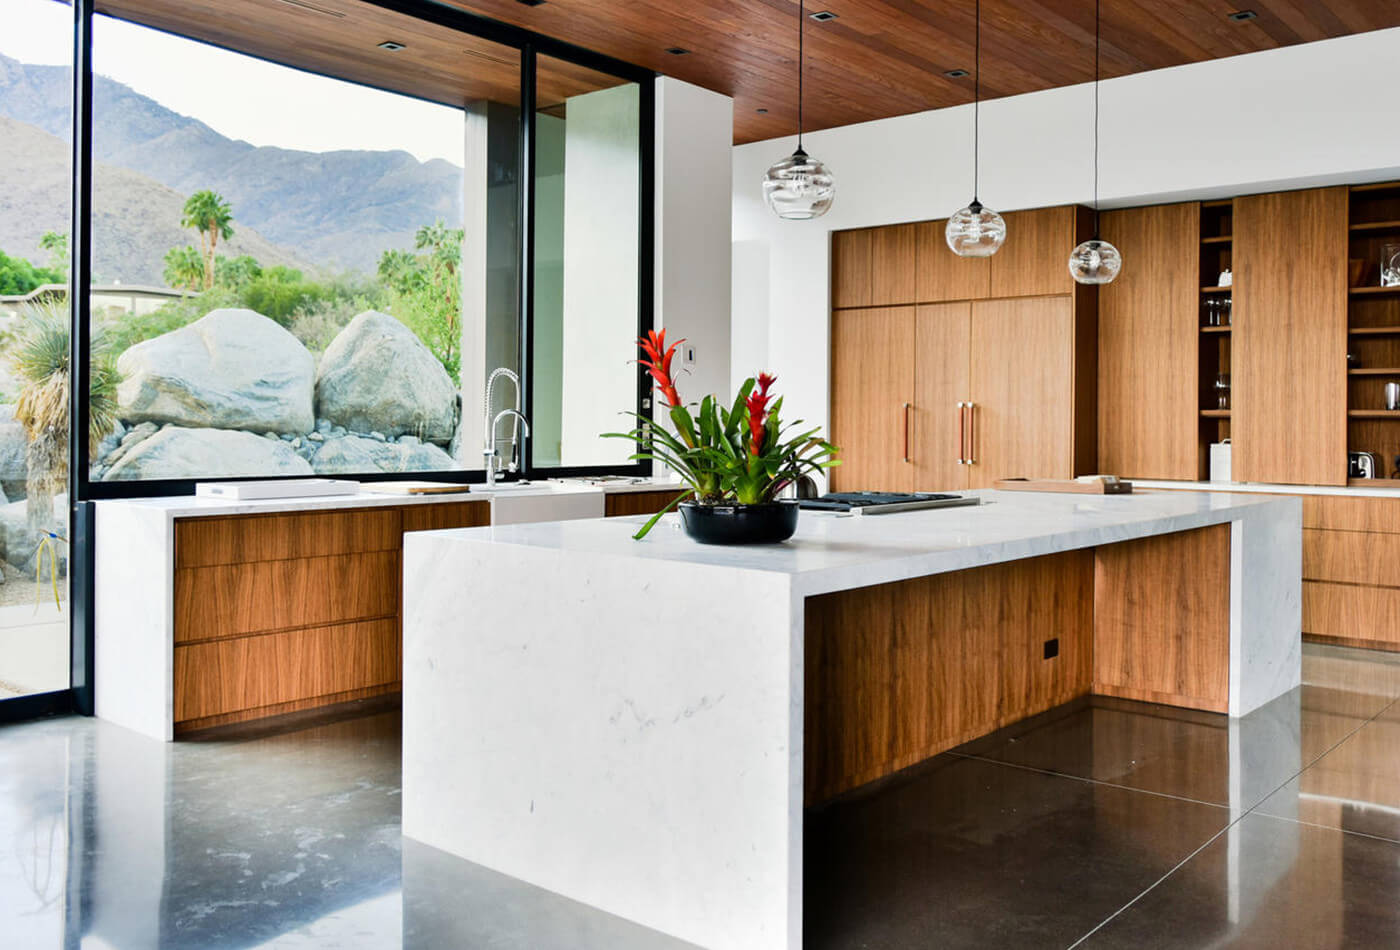 How To Bring Futuristic Kitchen Elements Together With Natural Stone